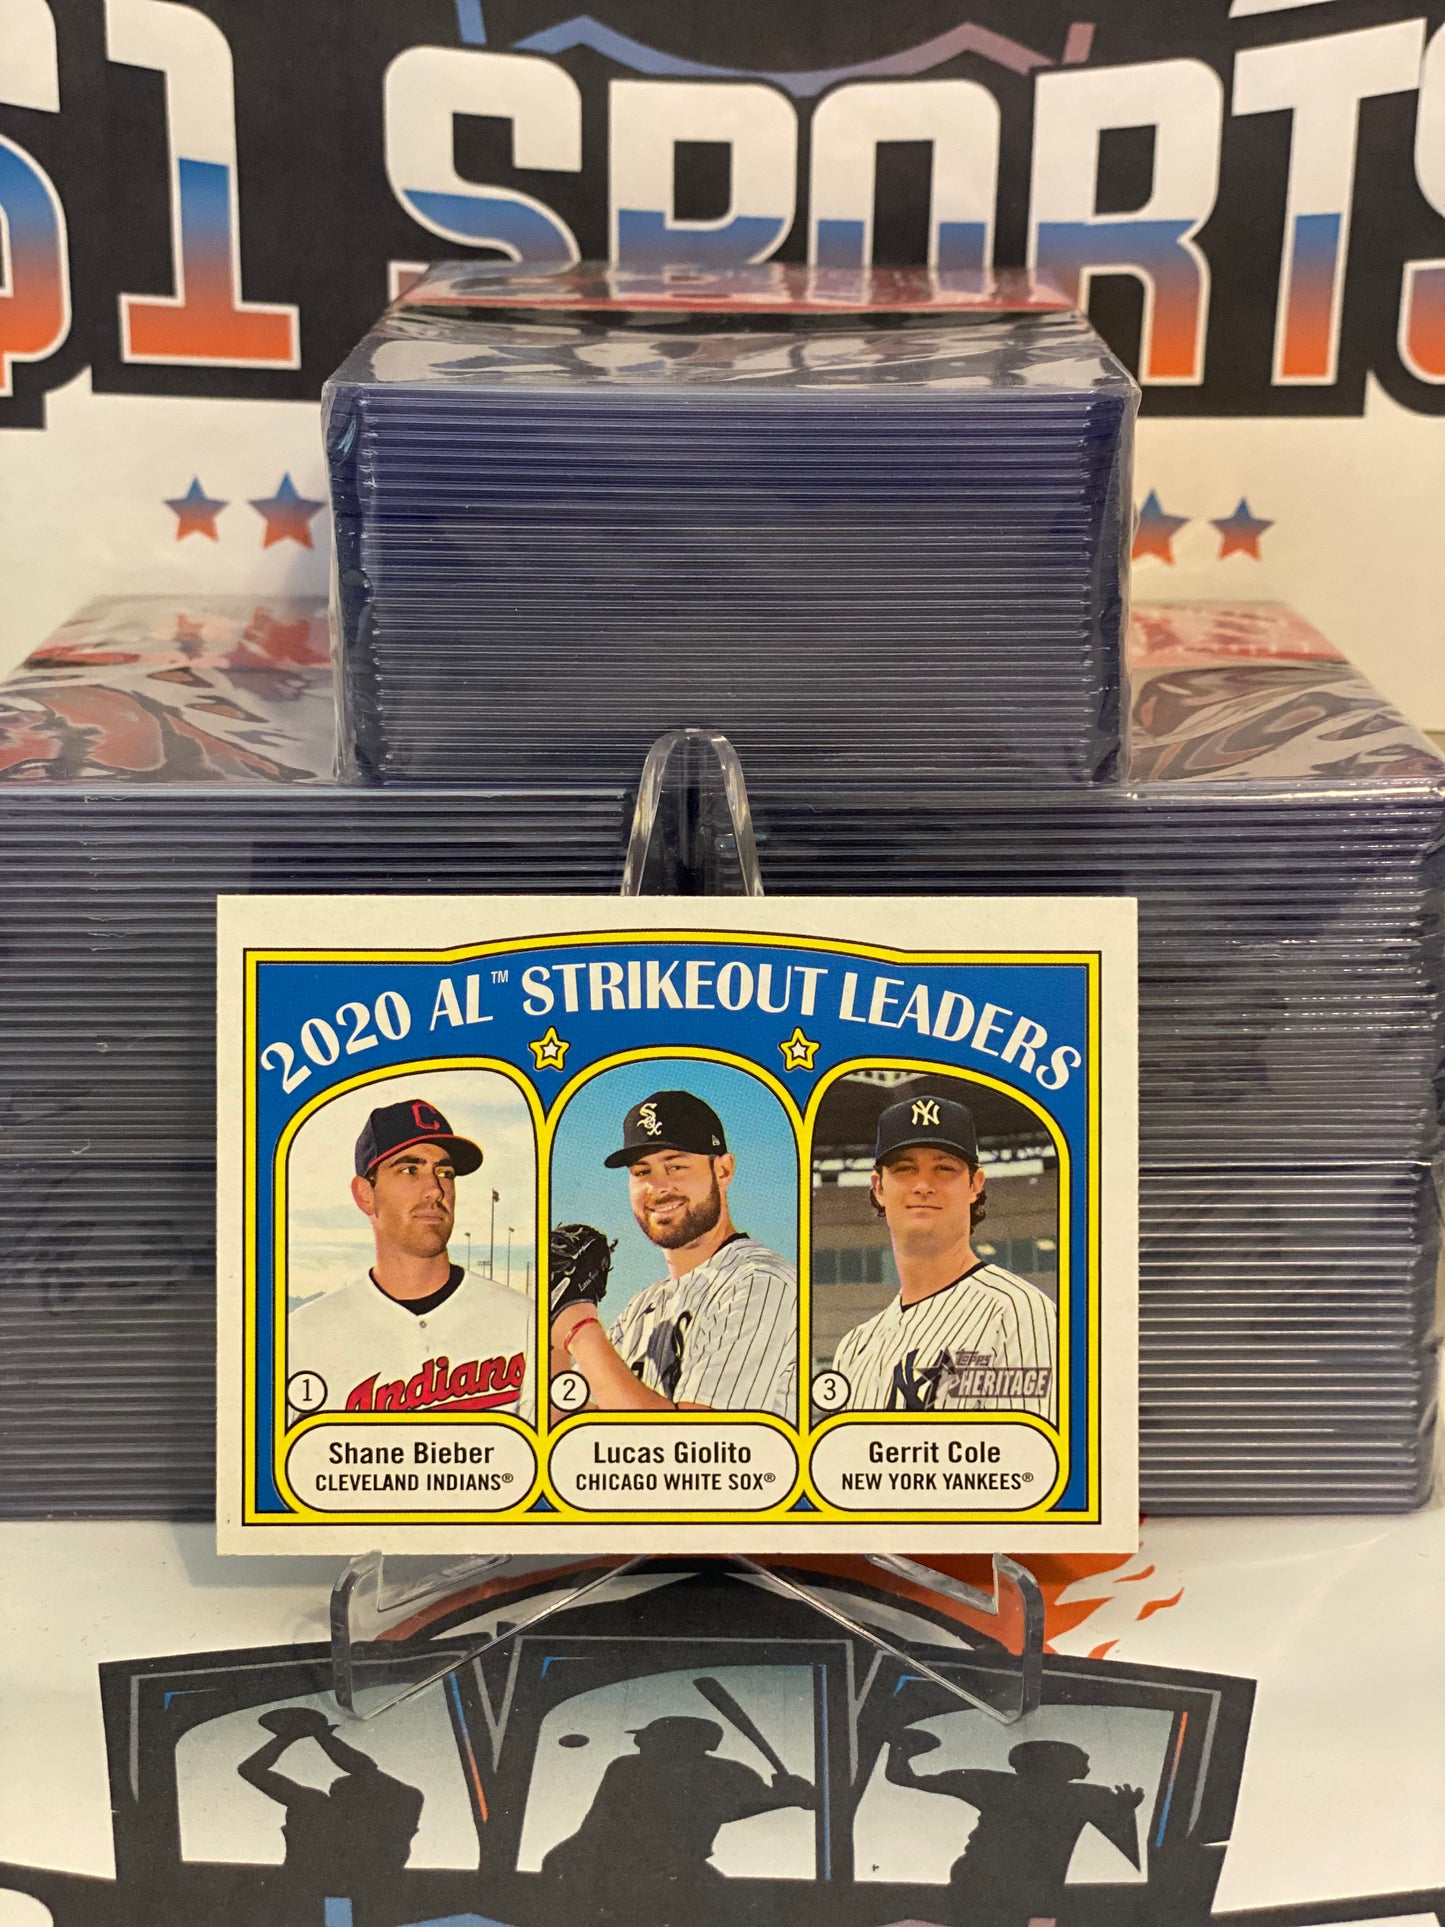 2021 Topps Heritage (2020 Strikeout Leaders) Shane Bieber, Lucas Giolito & Gerrit Cole #96